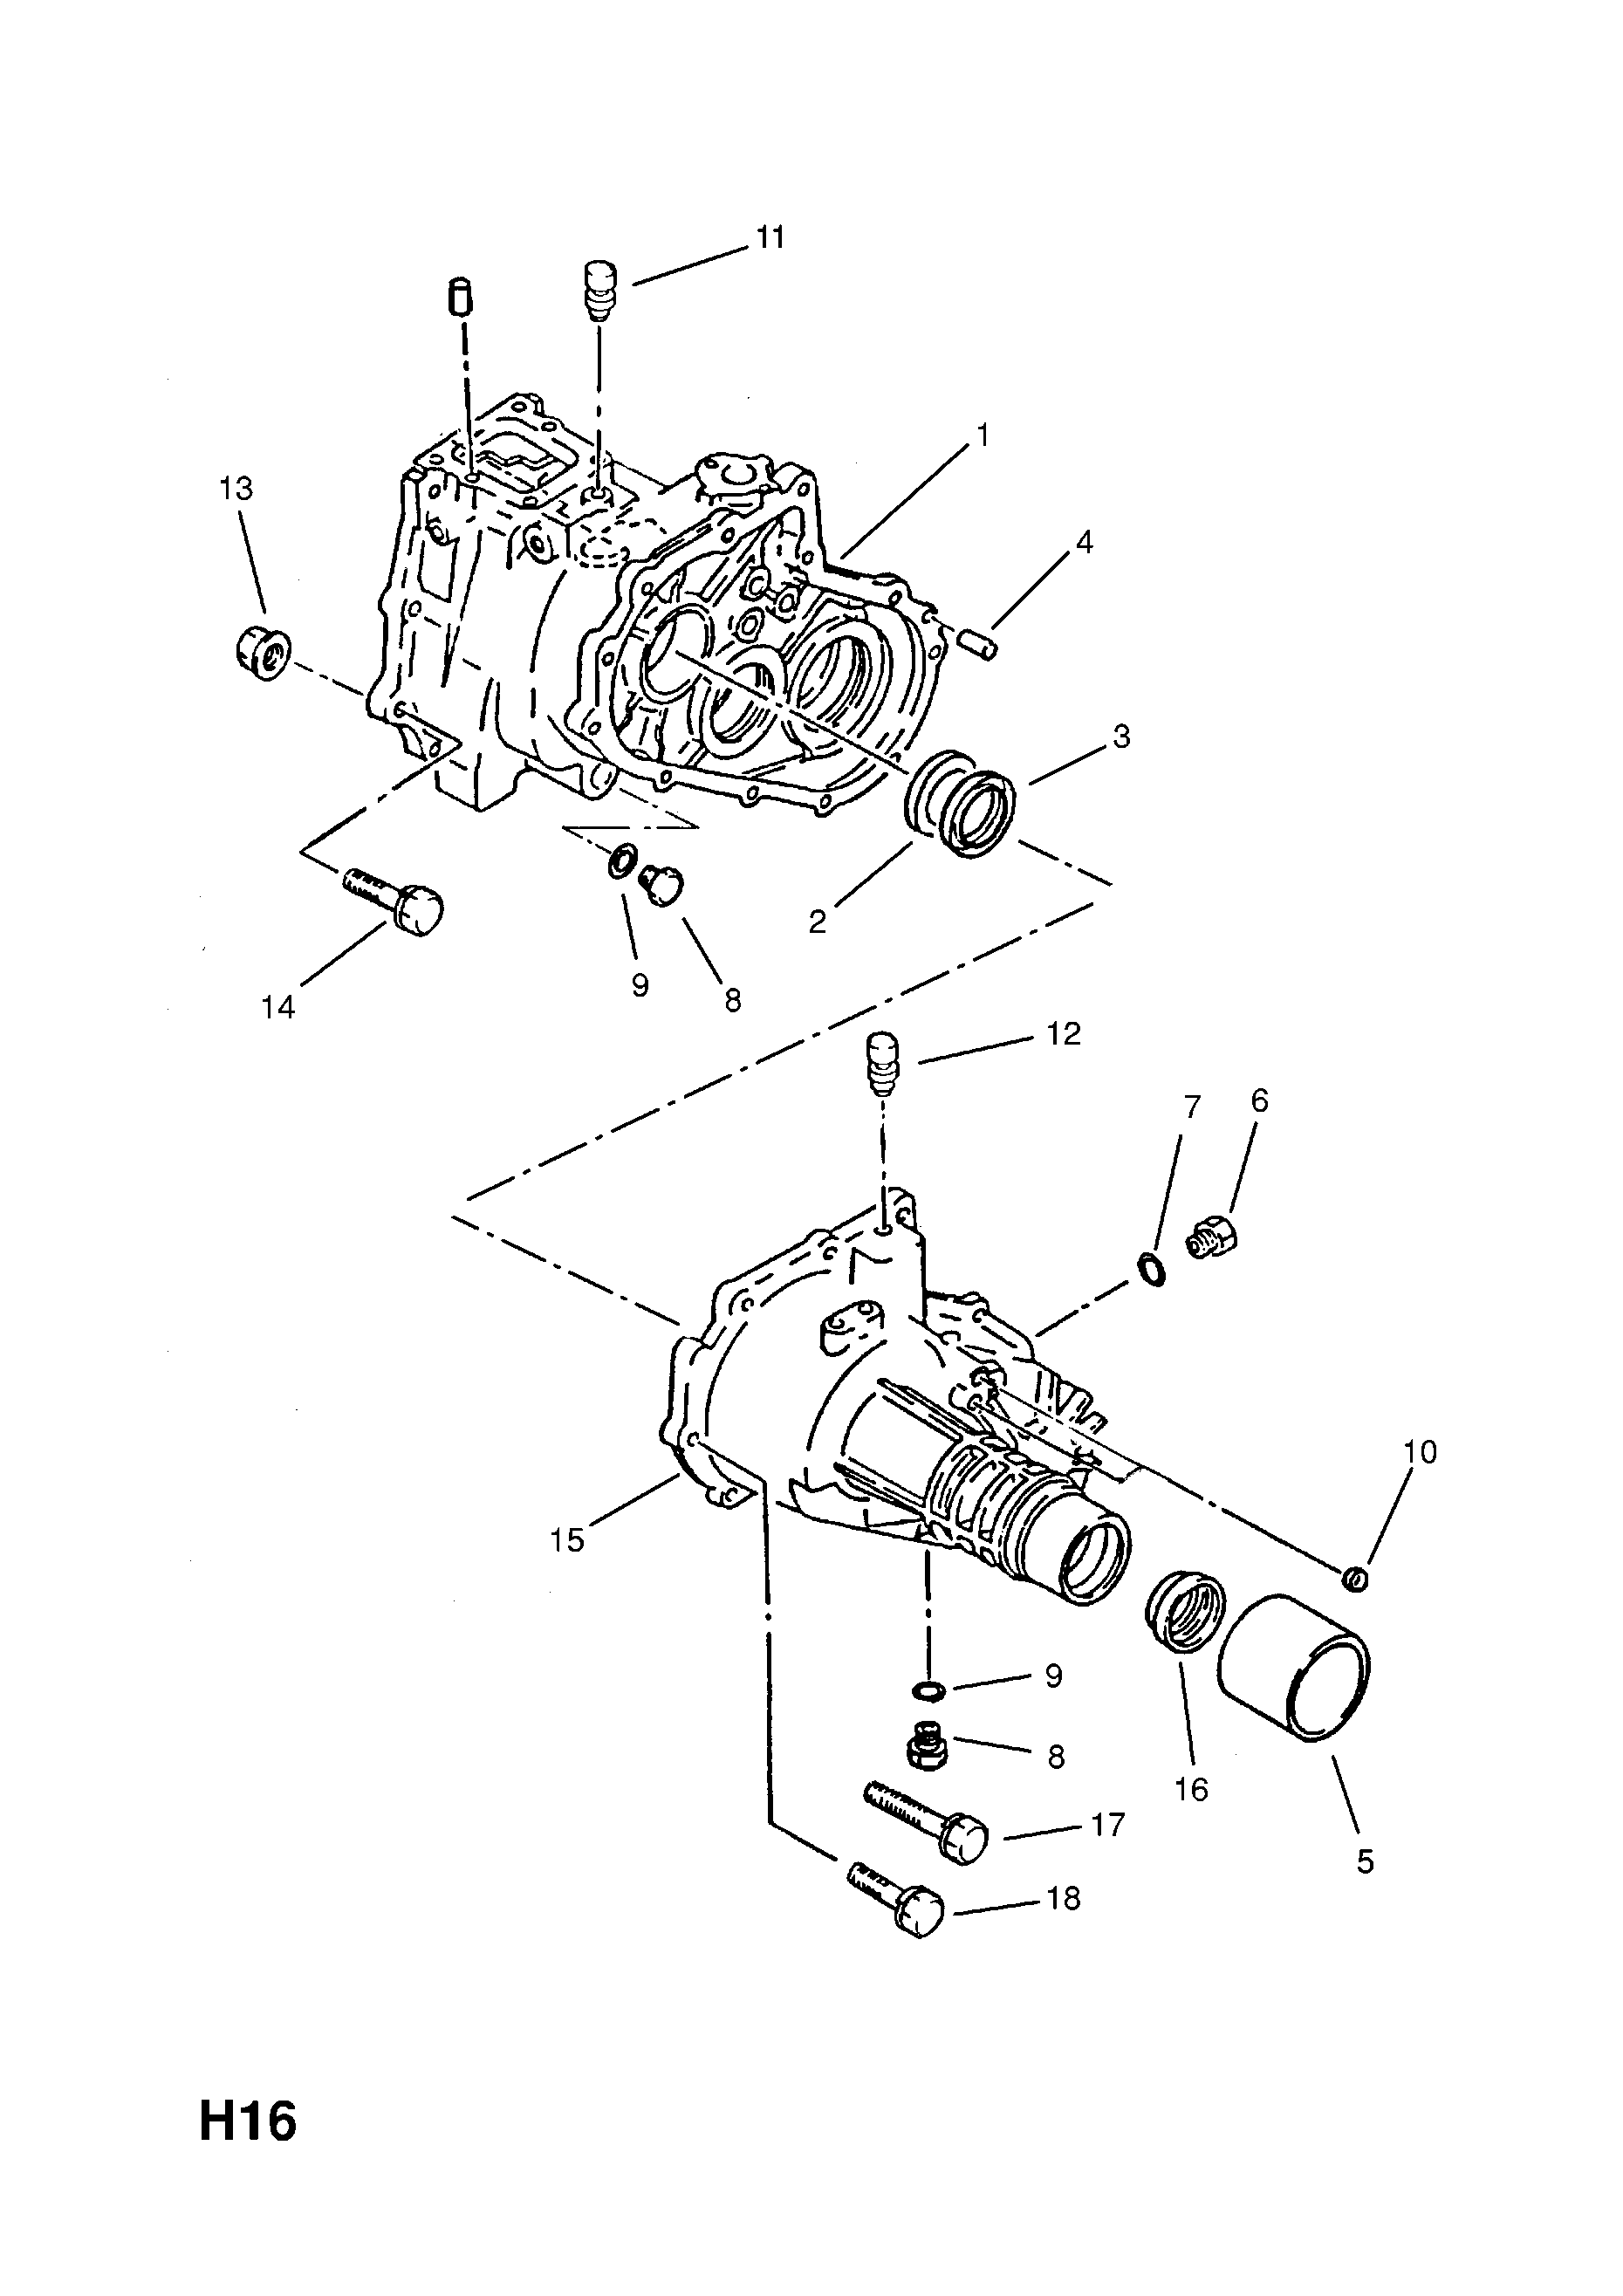 TRANSMISSION CASE AND COVERS (CONTD.) <small><i>[REAR TRANSFER CASING]</i></small>